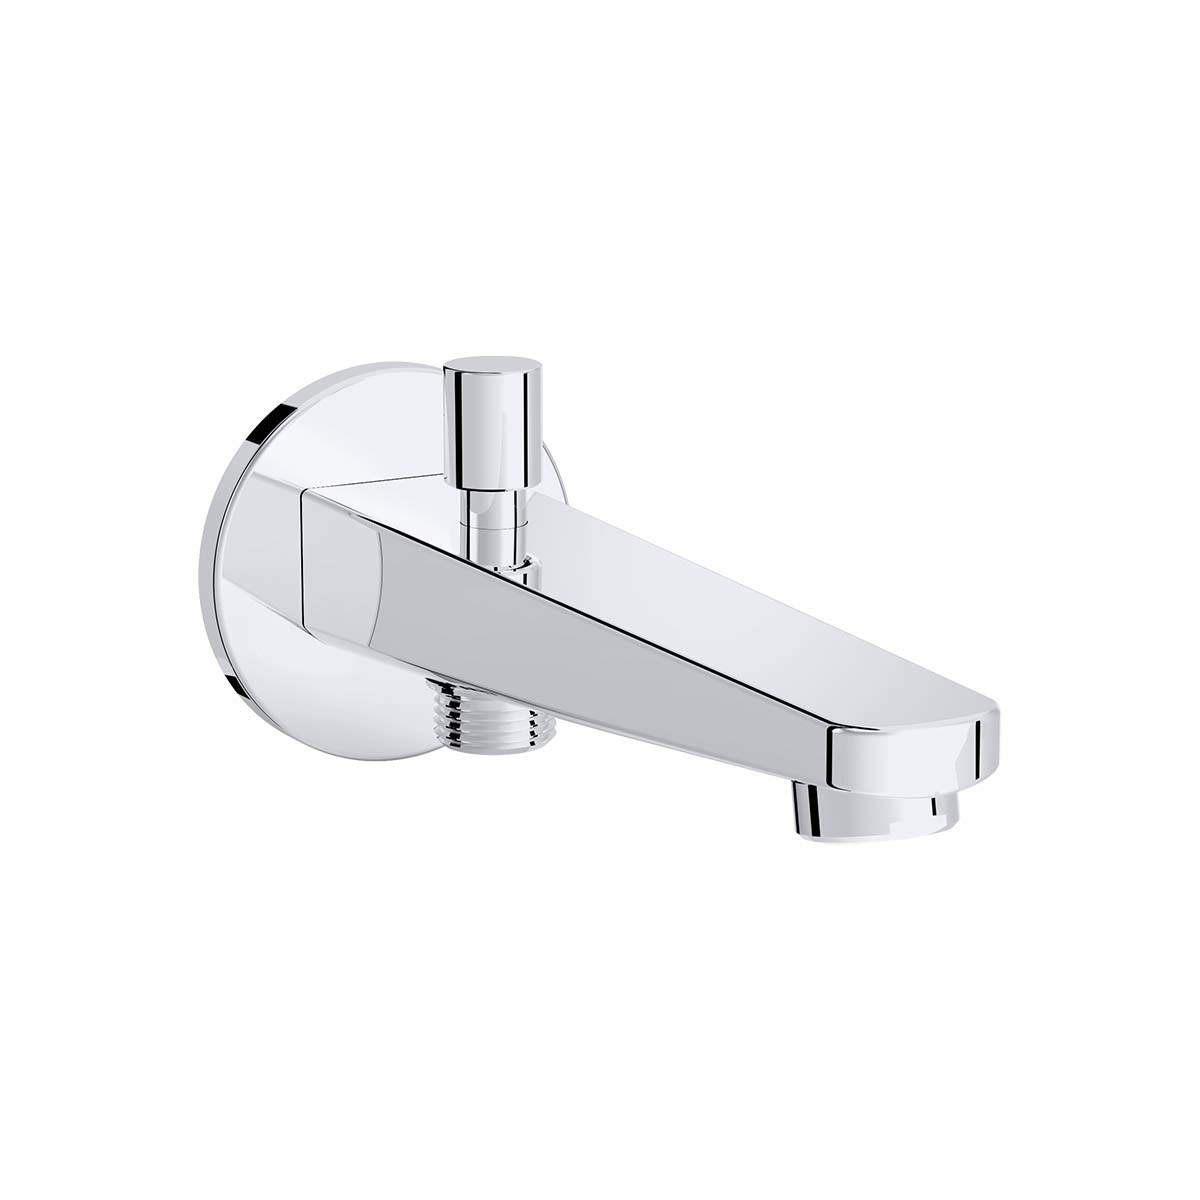 Bath spout (with handshower outlet)